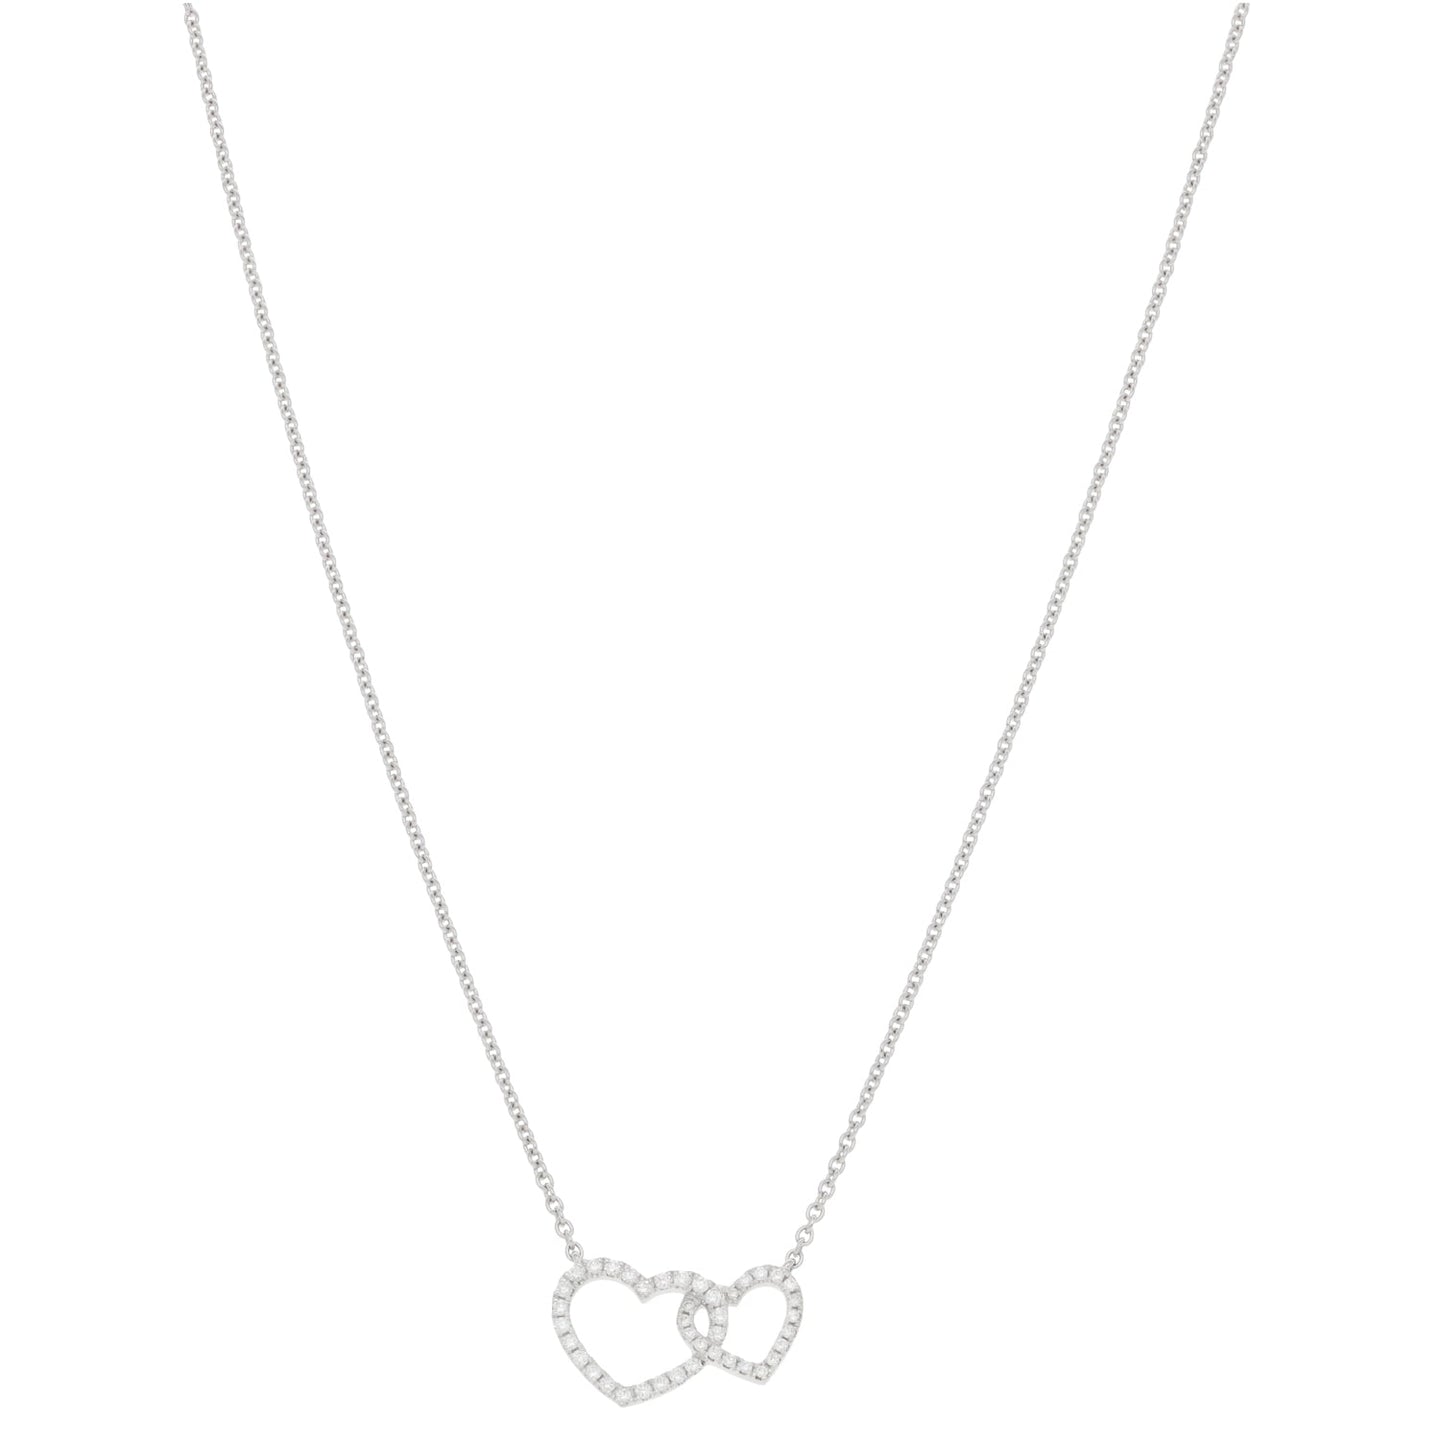 New 9ct White Gold Diamond Heart Pendant With Chain